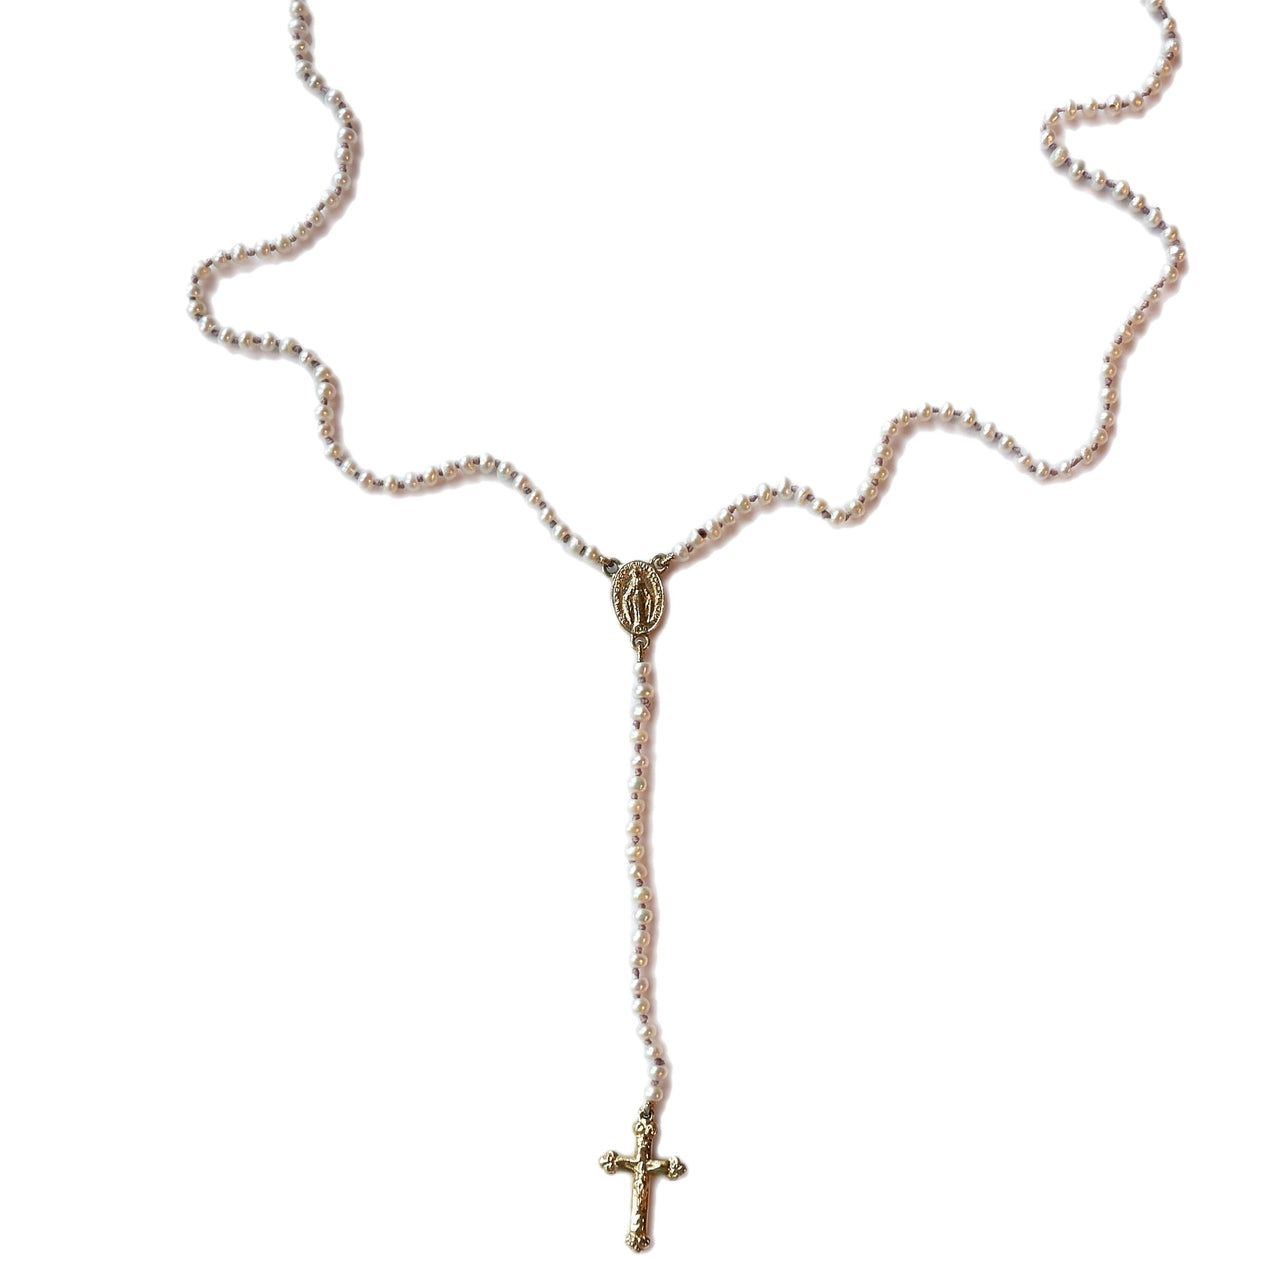 Rosario White Pearl Cross Virgin Mary Solid Gold Necklace